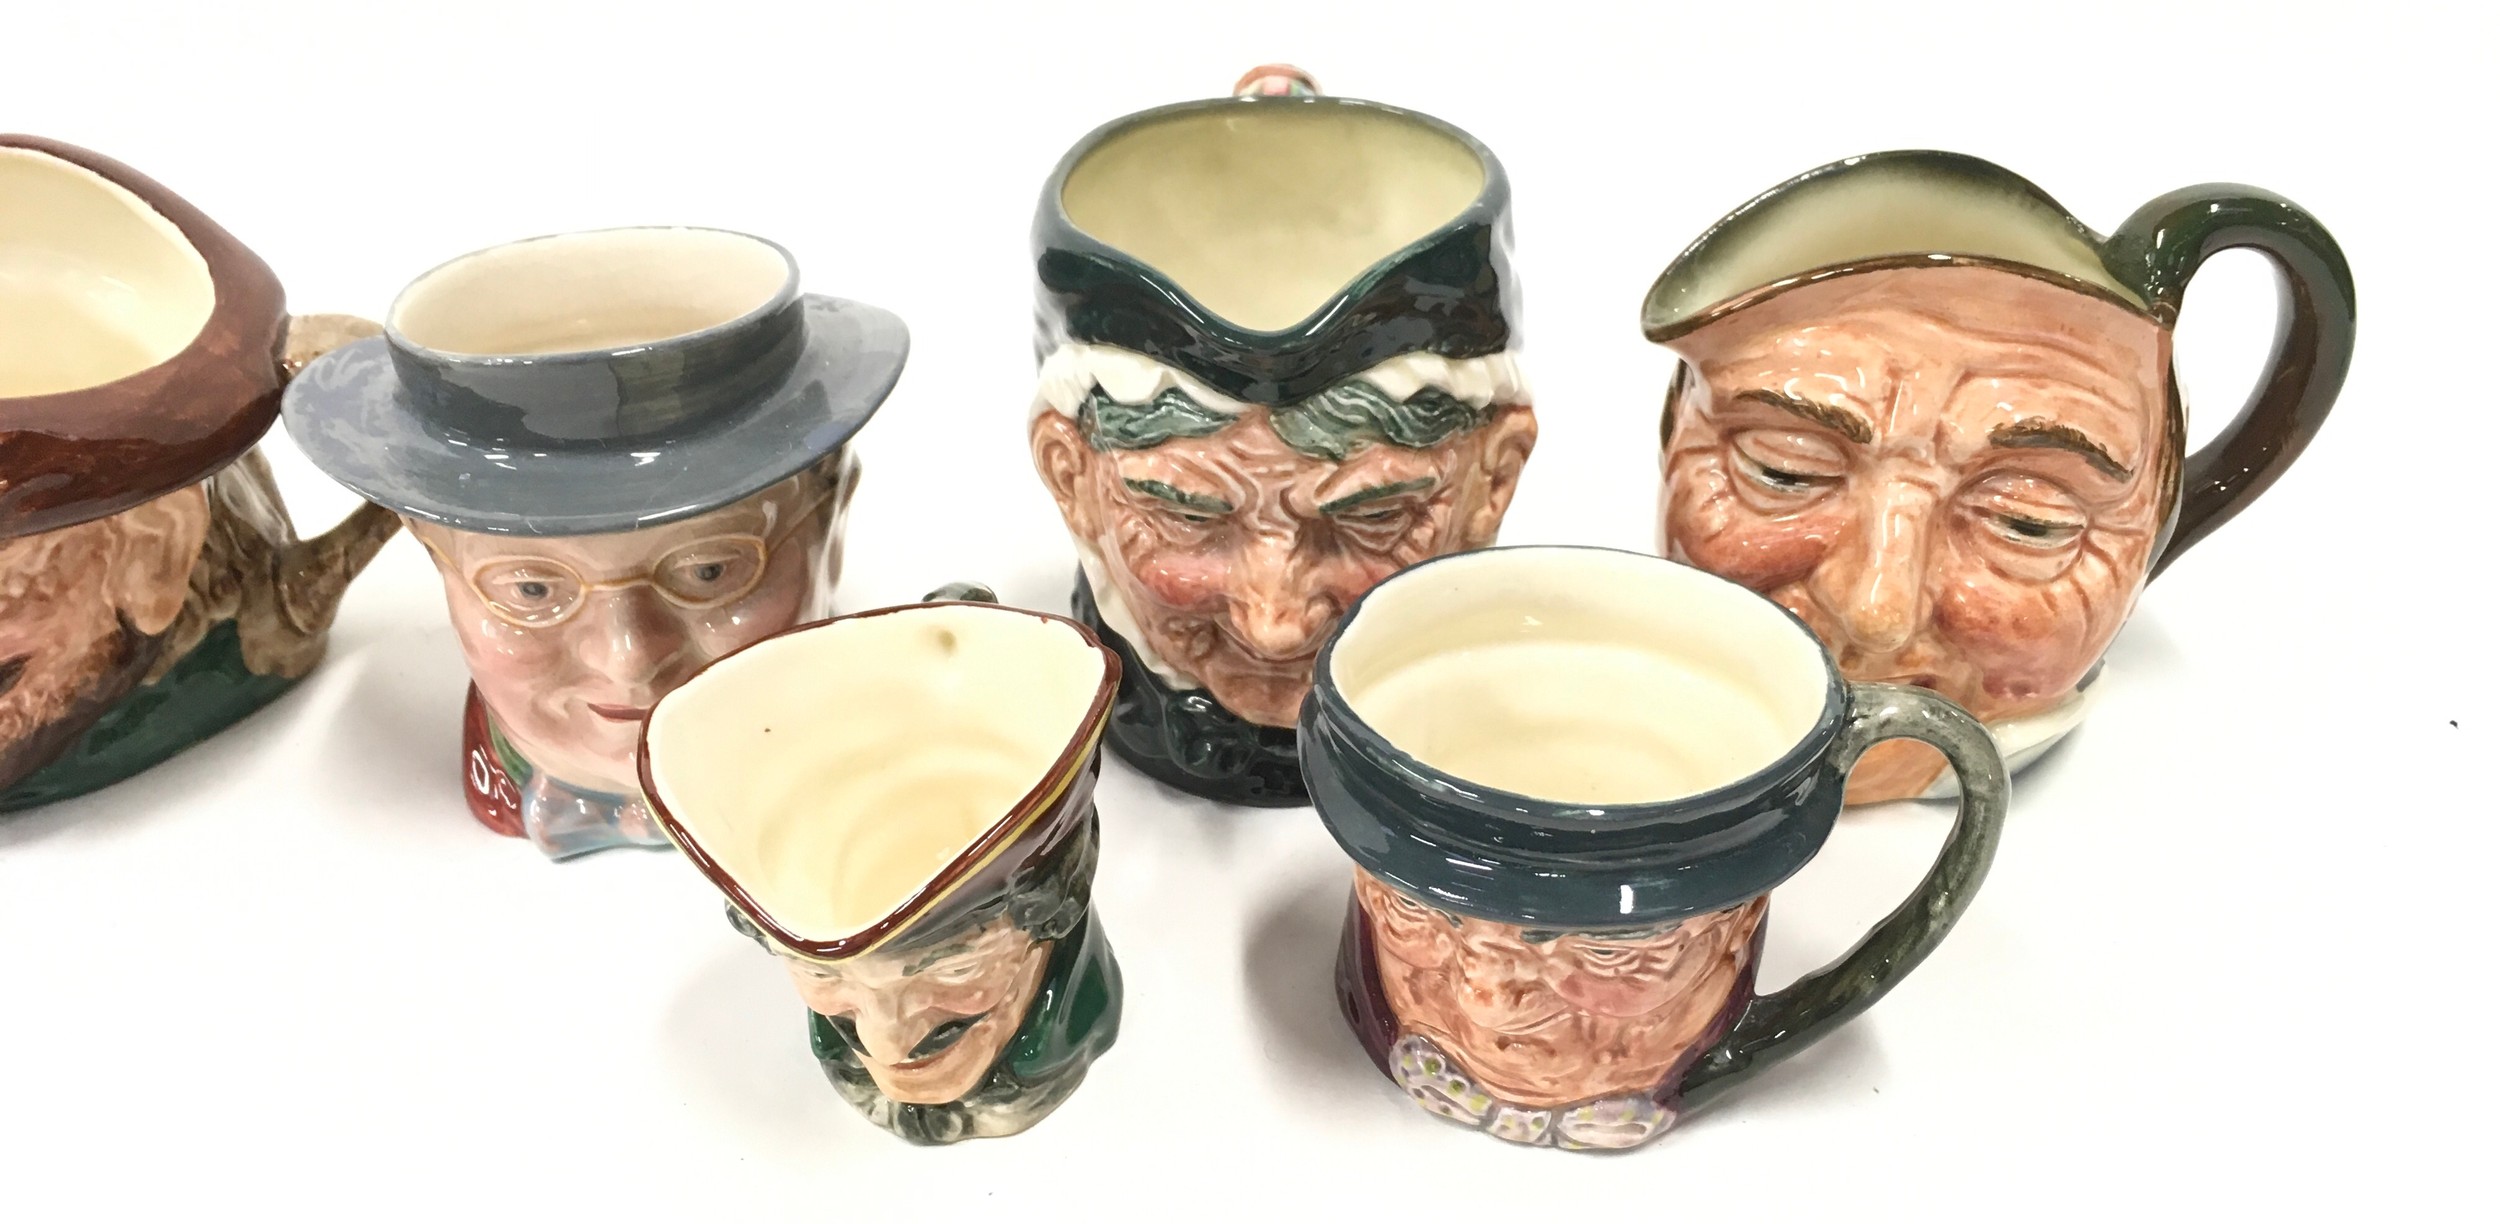 Eleven toby character jugs with examples by Royal Doulton and Beswick. - Image 2 of 5